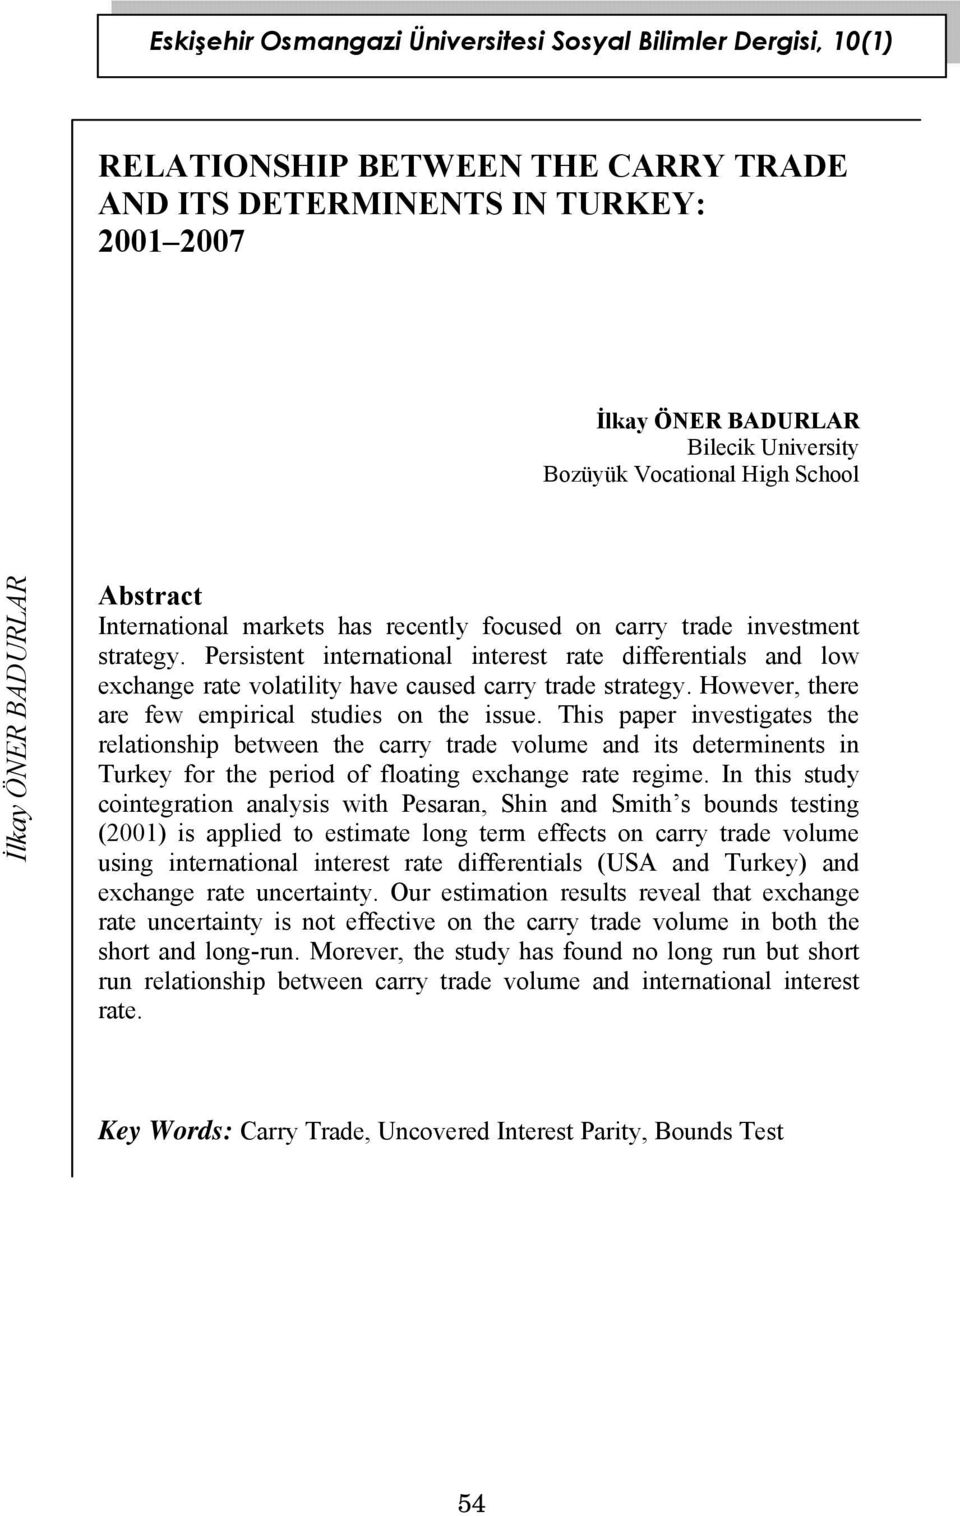 This paper investigates the relationship between the carry trade volume and its determinents in Turkey for the period of floating exchange rate regime.